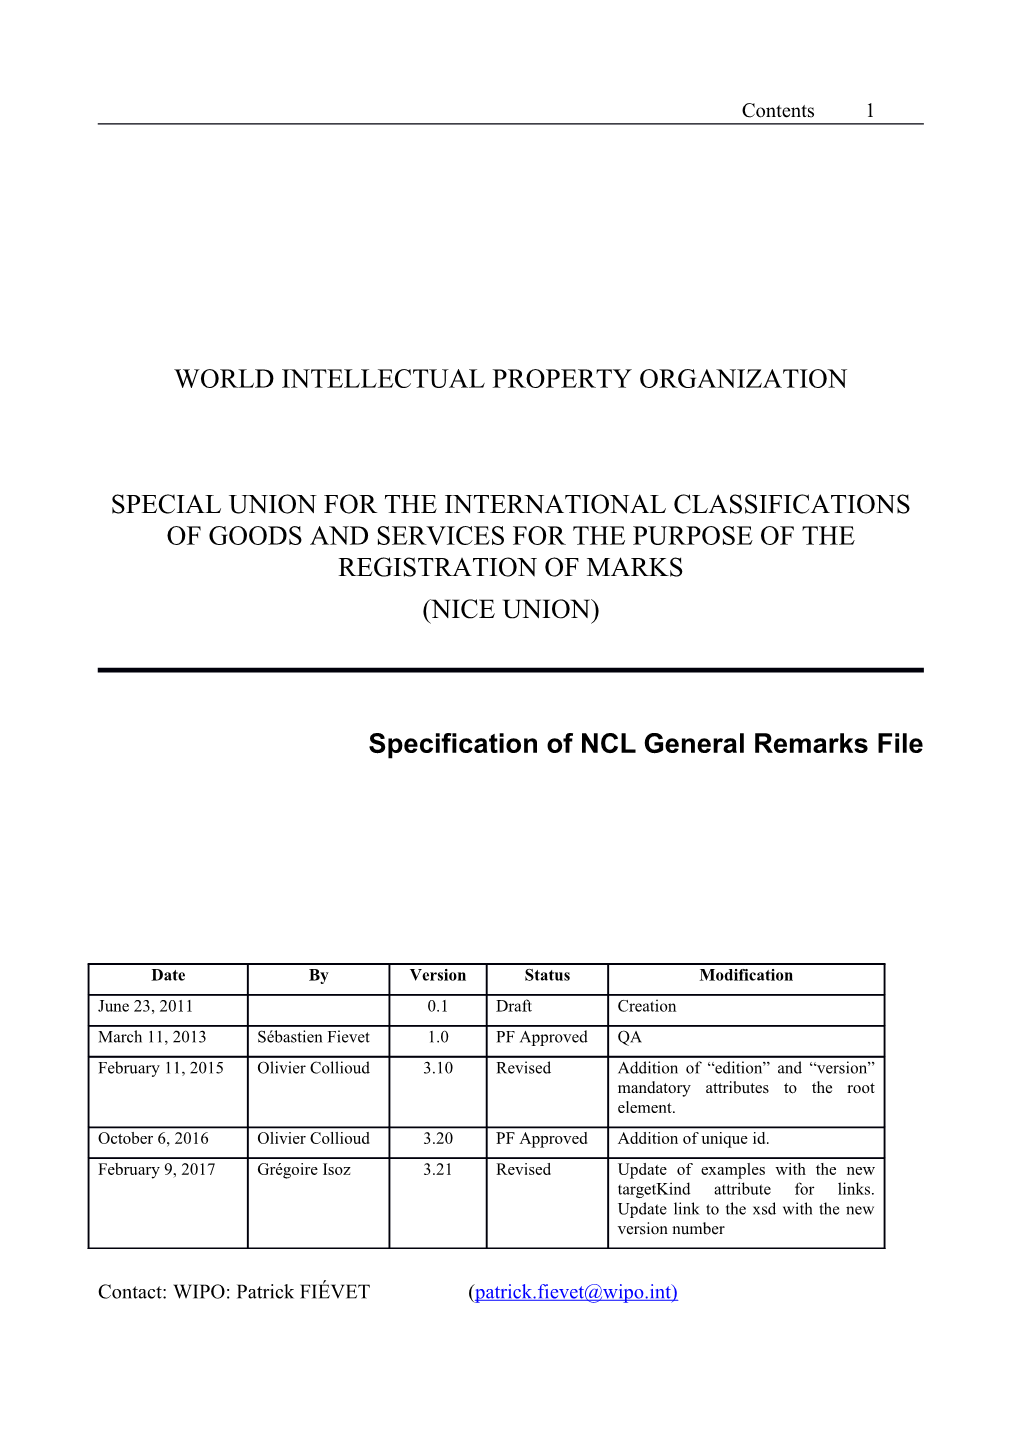 Specification of NCL General Remarks File